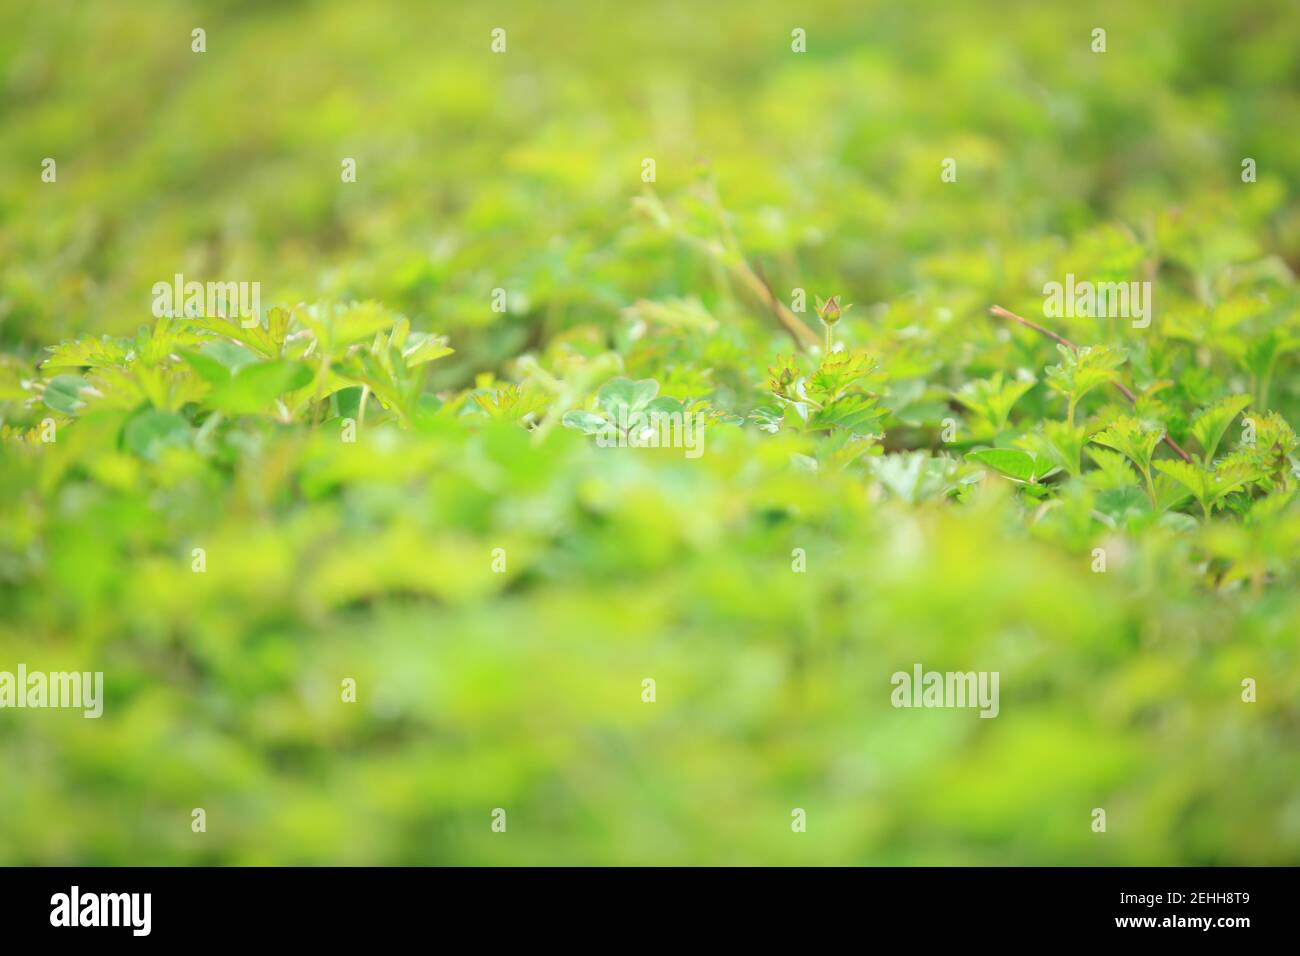 Grass background, green background, close-up Stock Photo